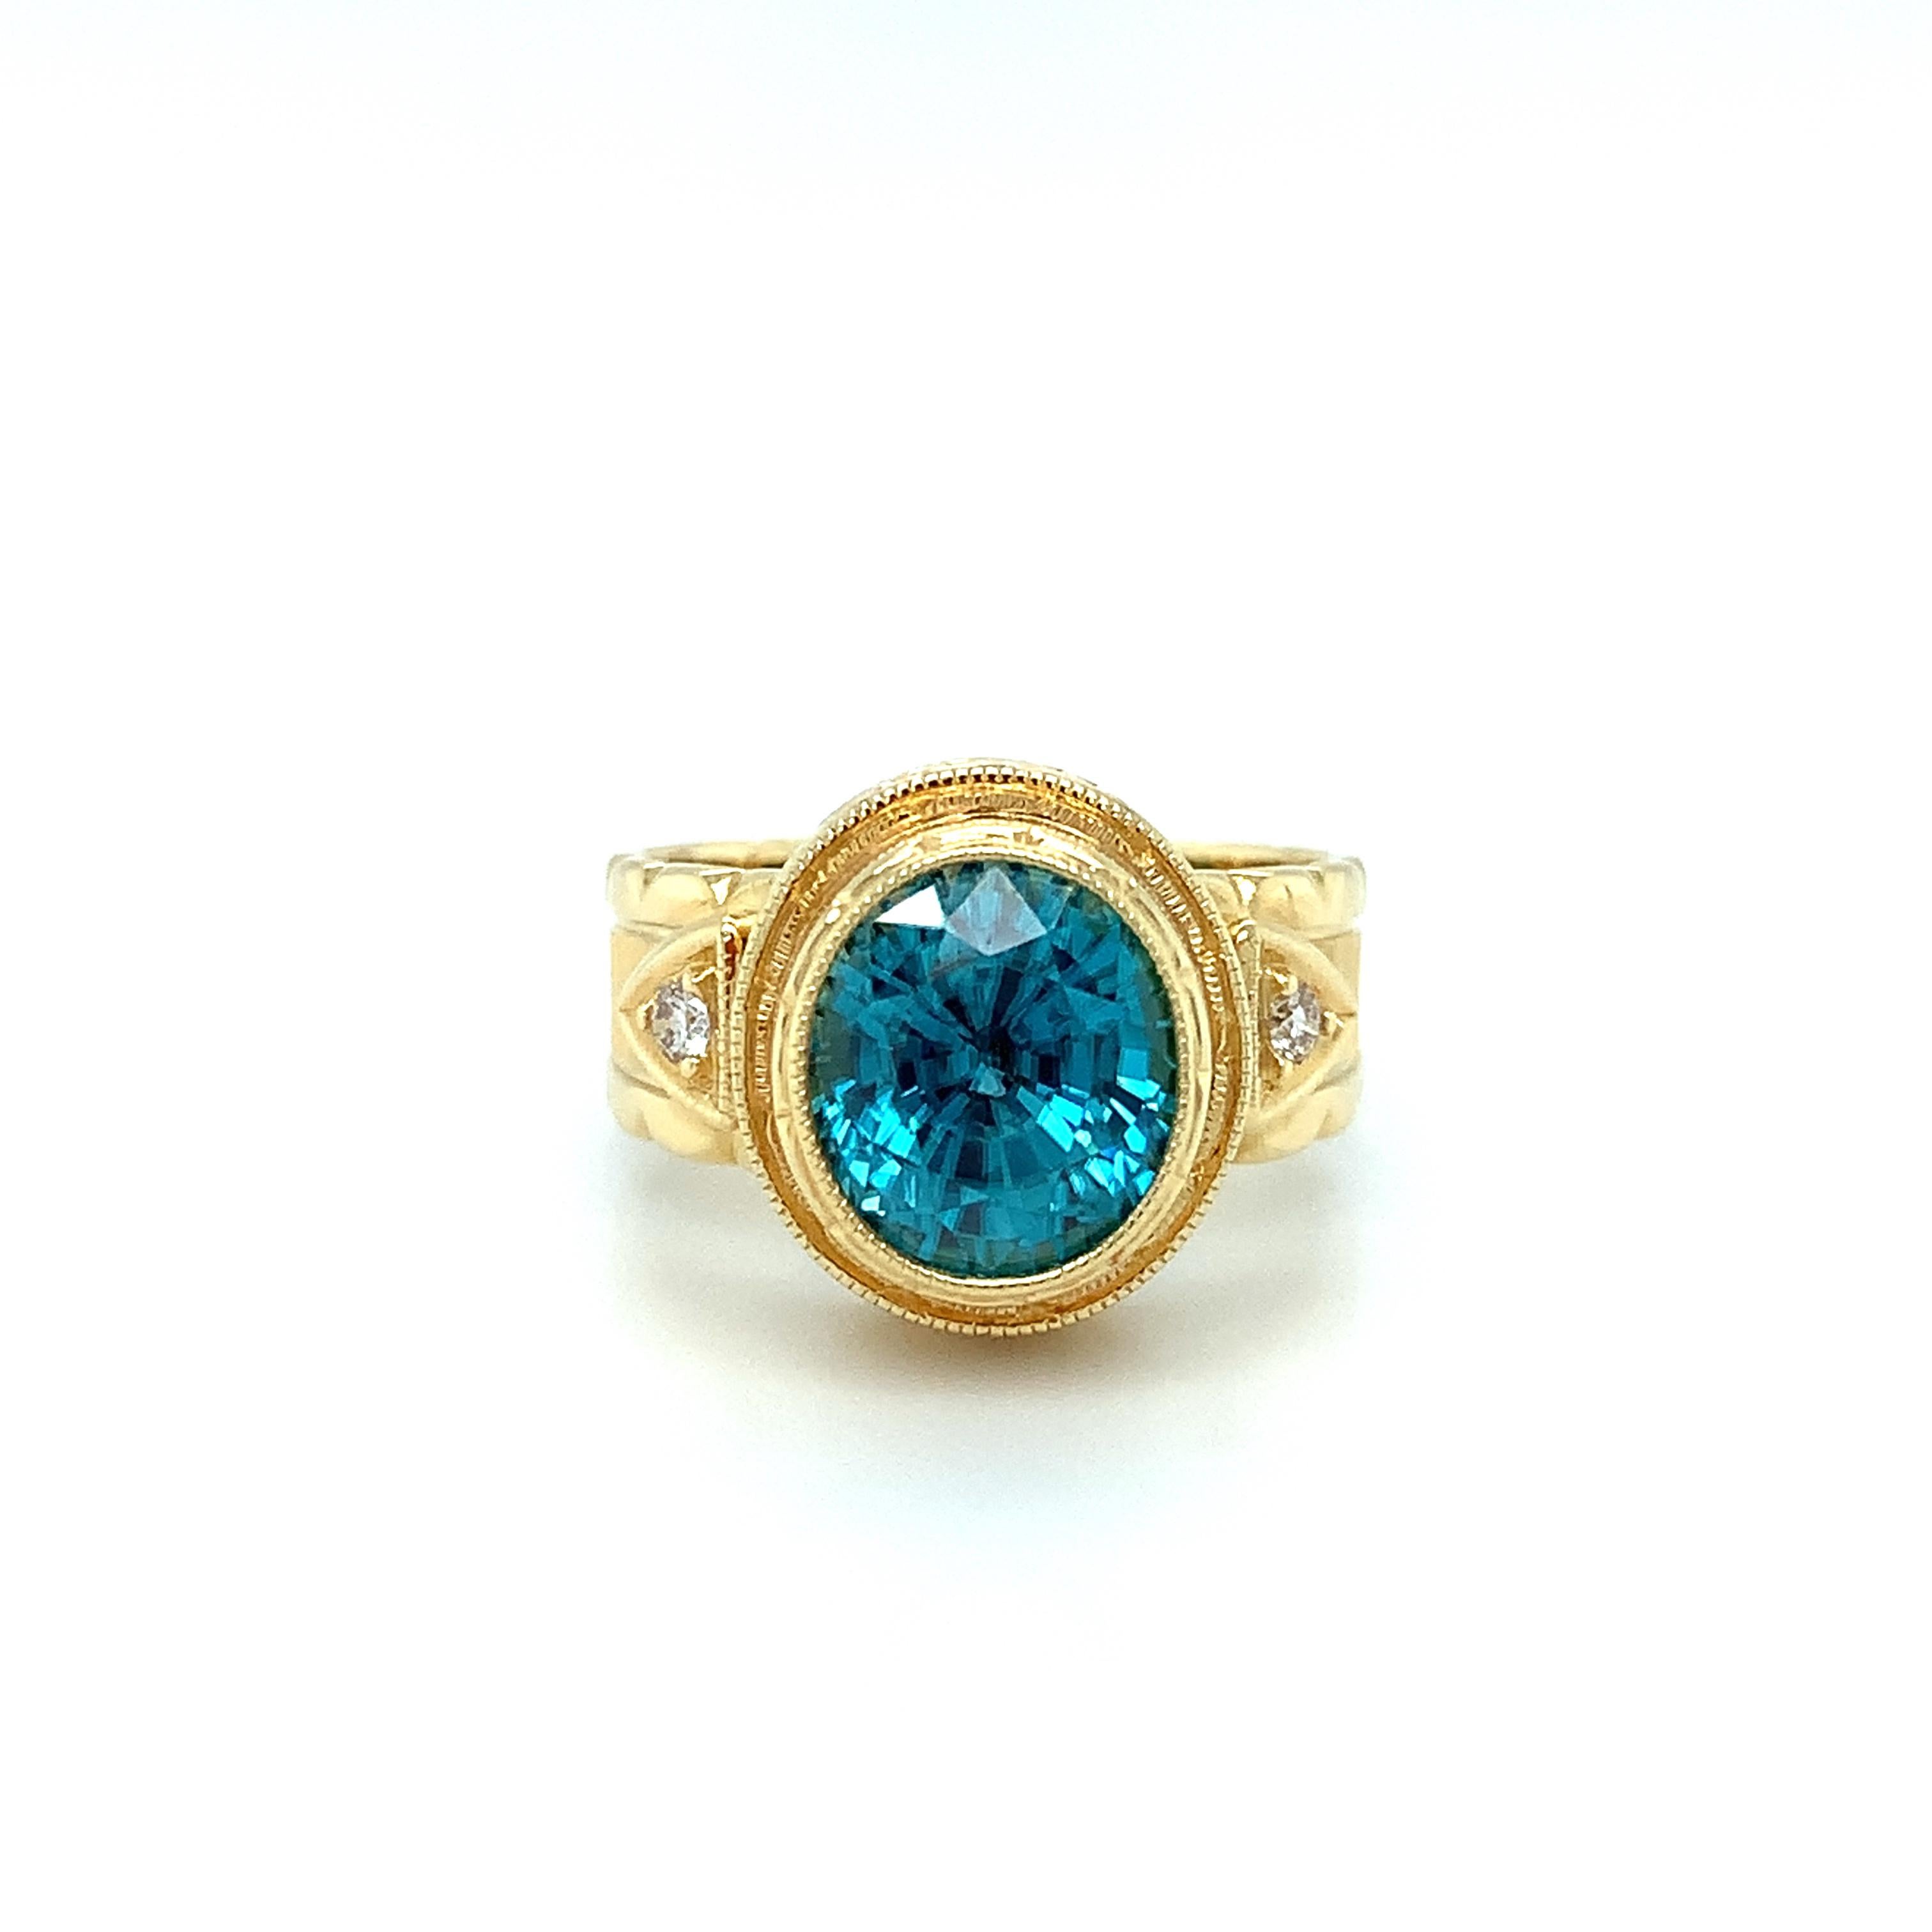 Strikingly brilliant with amazing, almost neon Tahitian blue color, this 4.72 carat zircon is absolutely stunning set in one of our most popular signature designs. This vibrant gem has the superior brilliance characteristic of zircons, and is